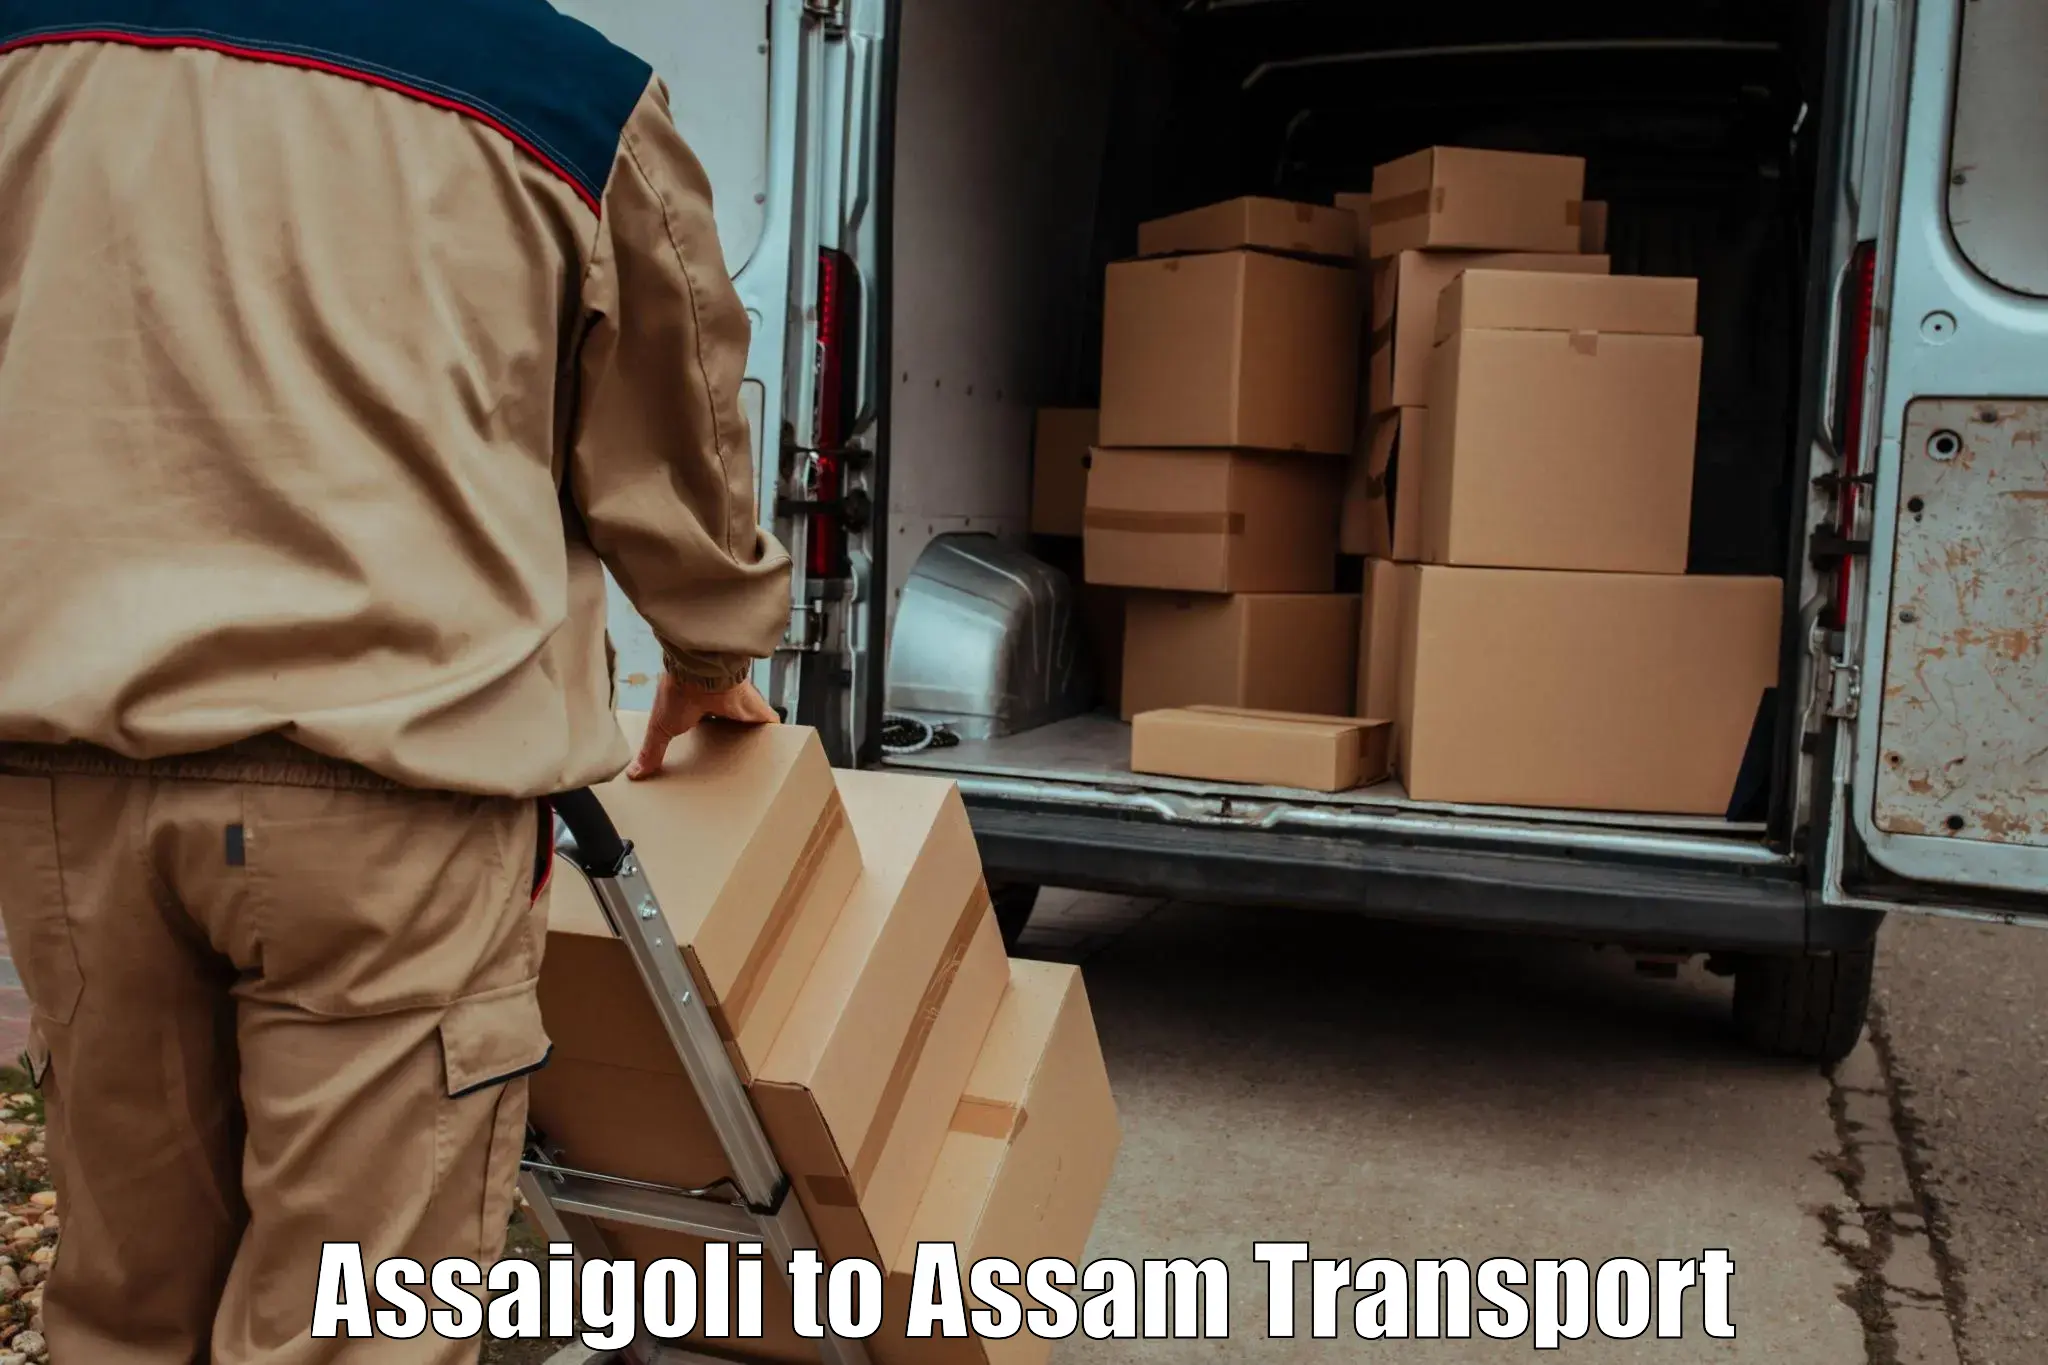 Land transport services in Assaigoli to Borholla